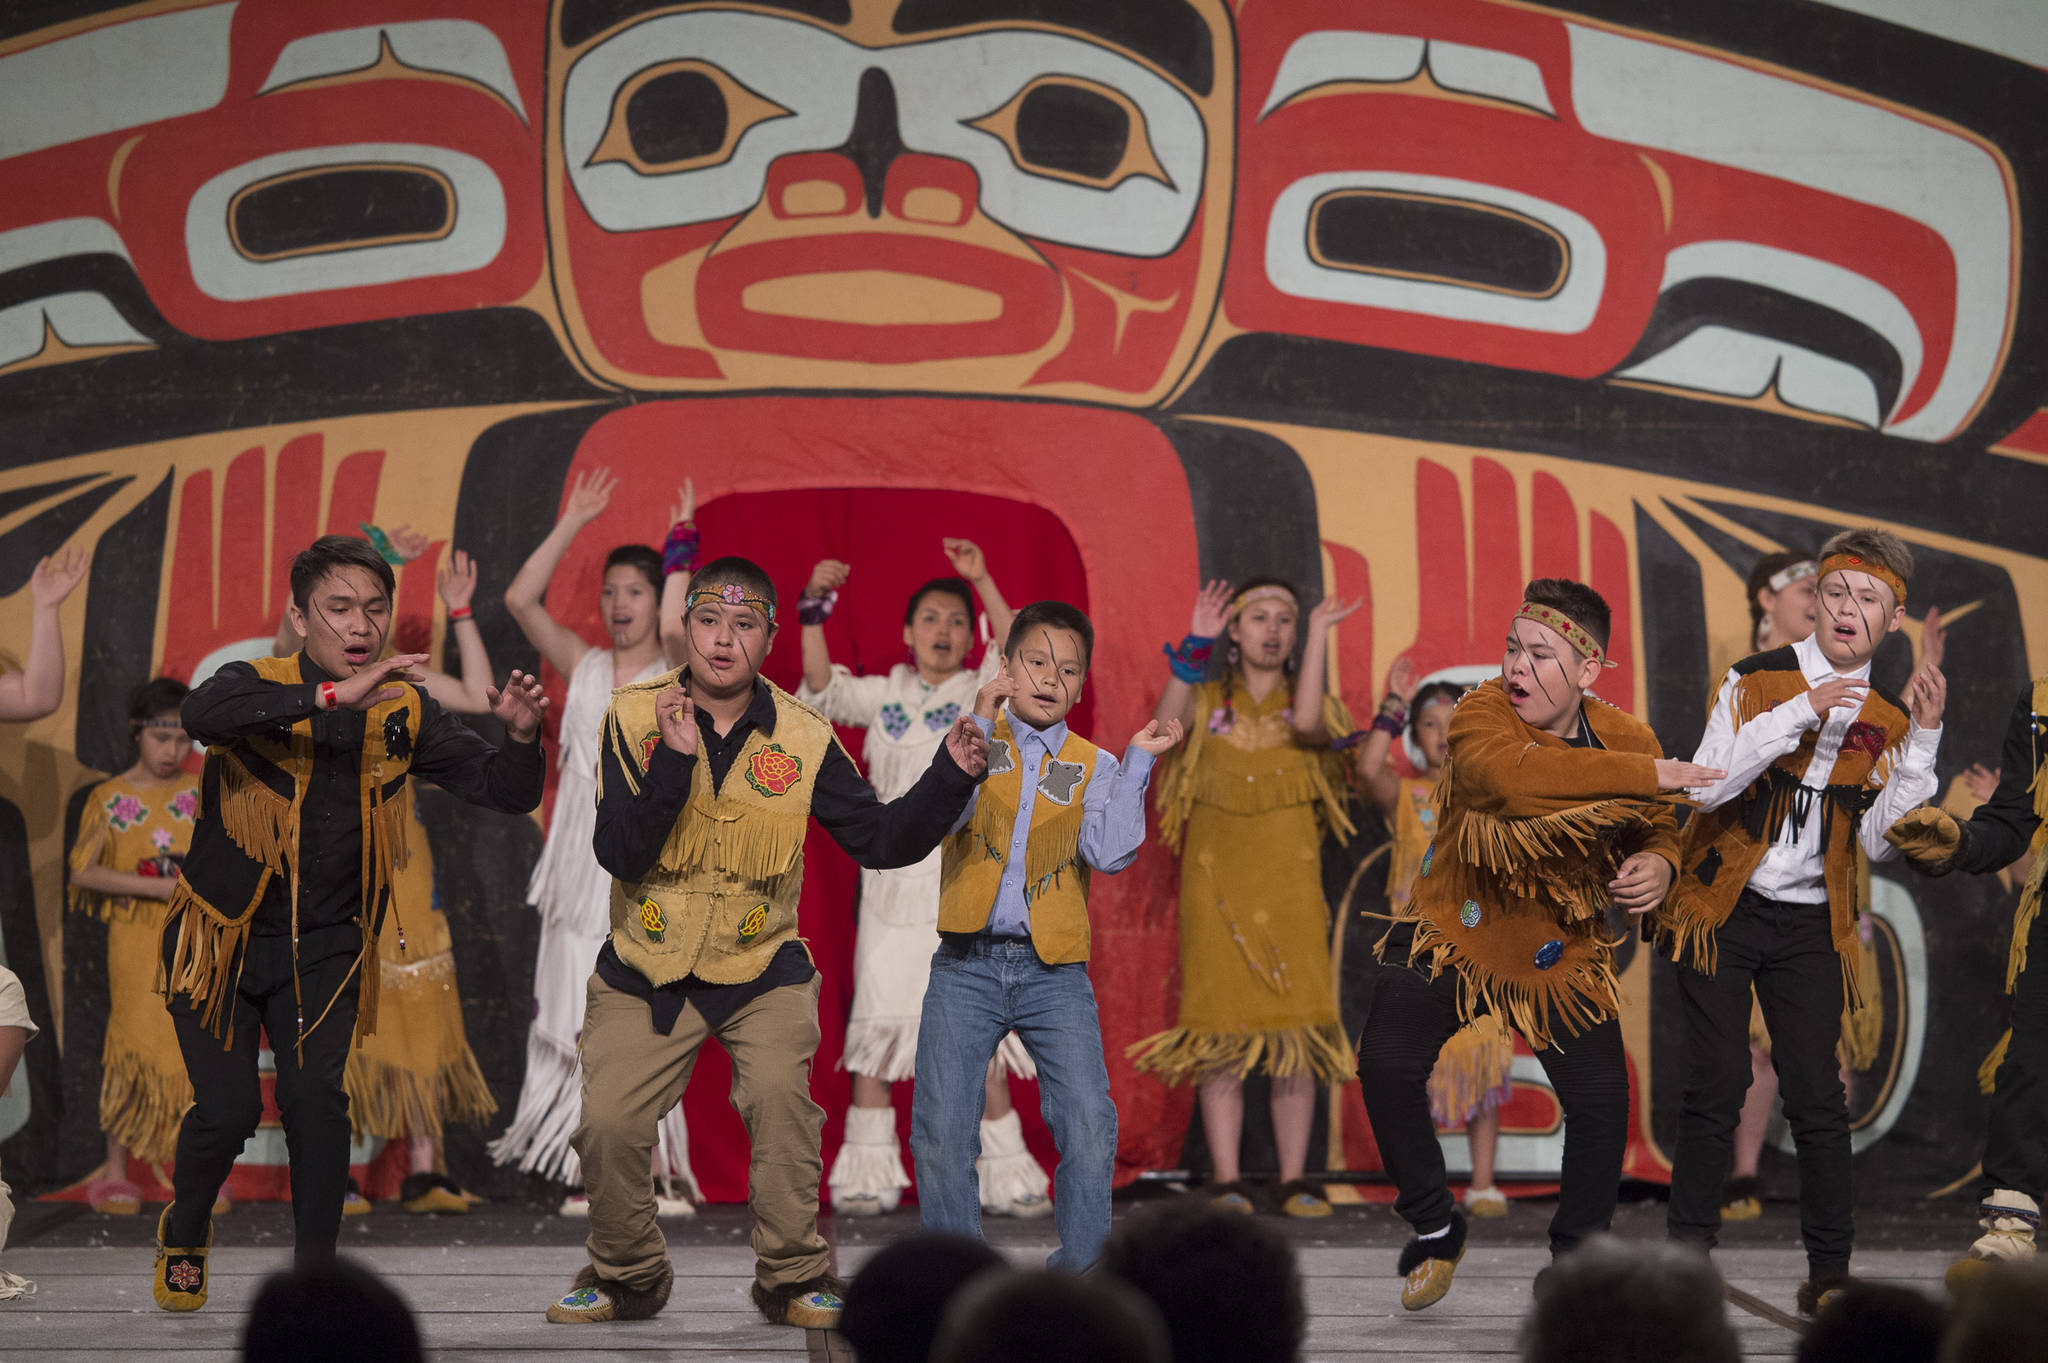 Opinion: Arts and culture integral to Alaska’s rural communities